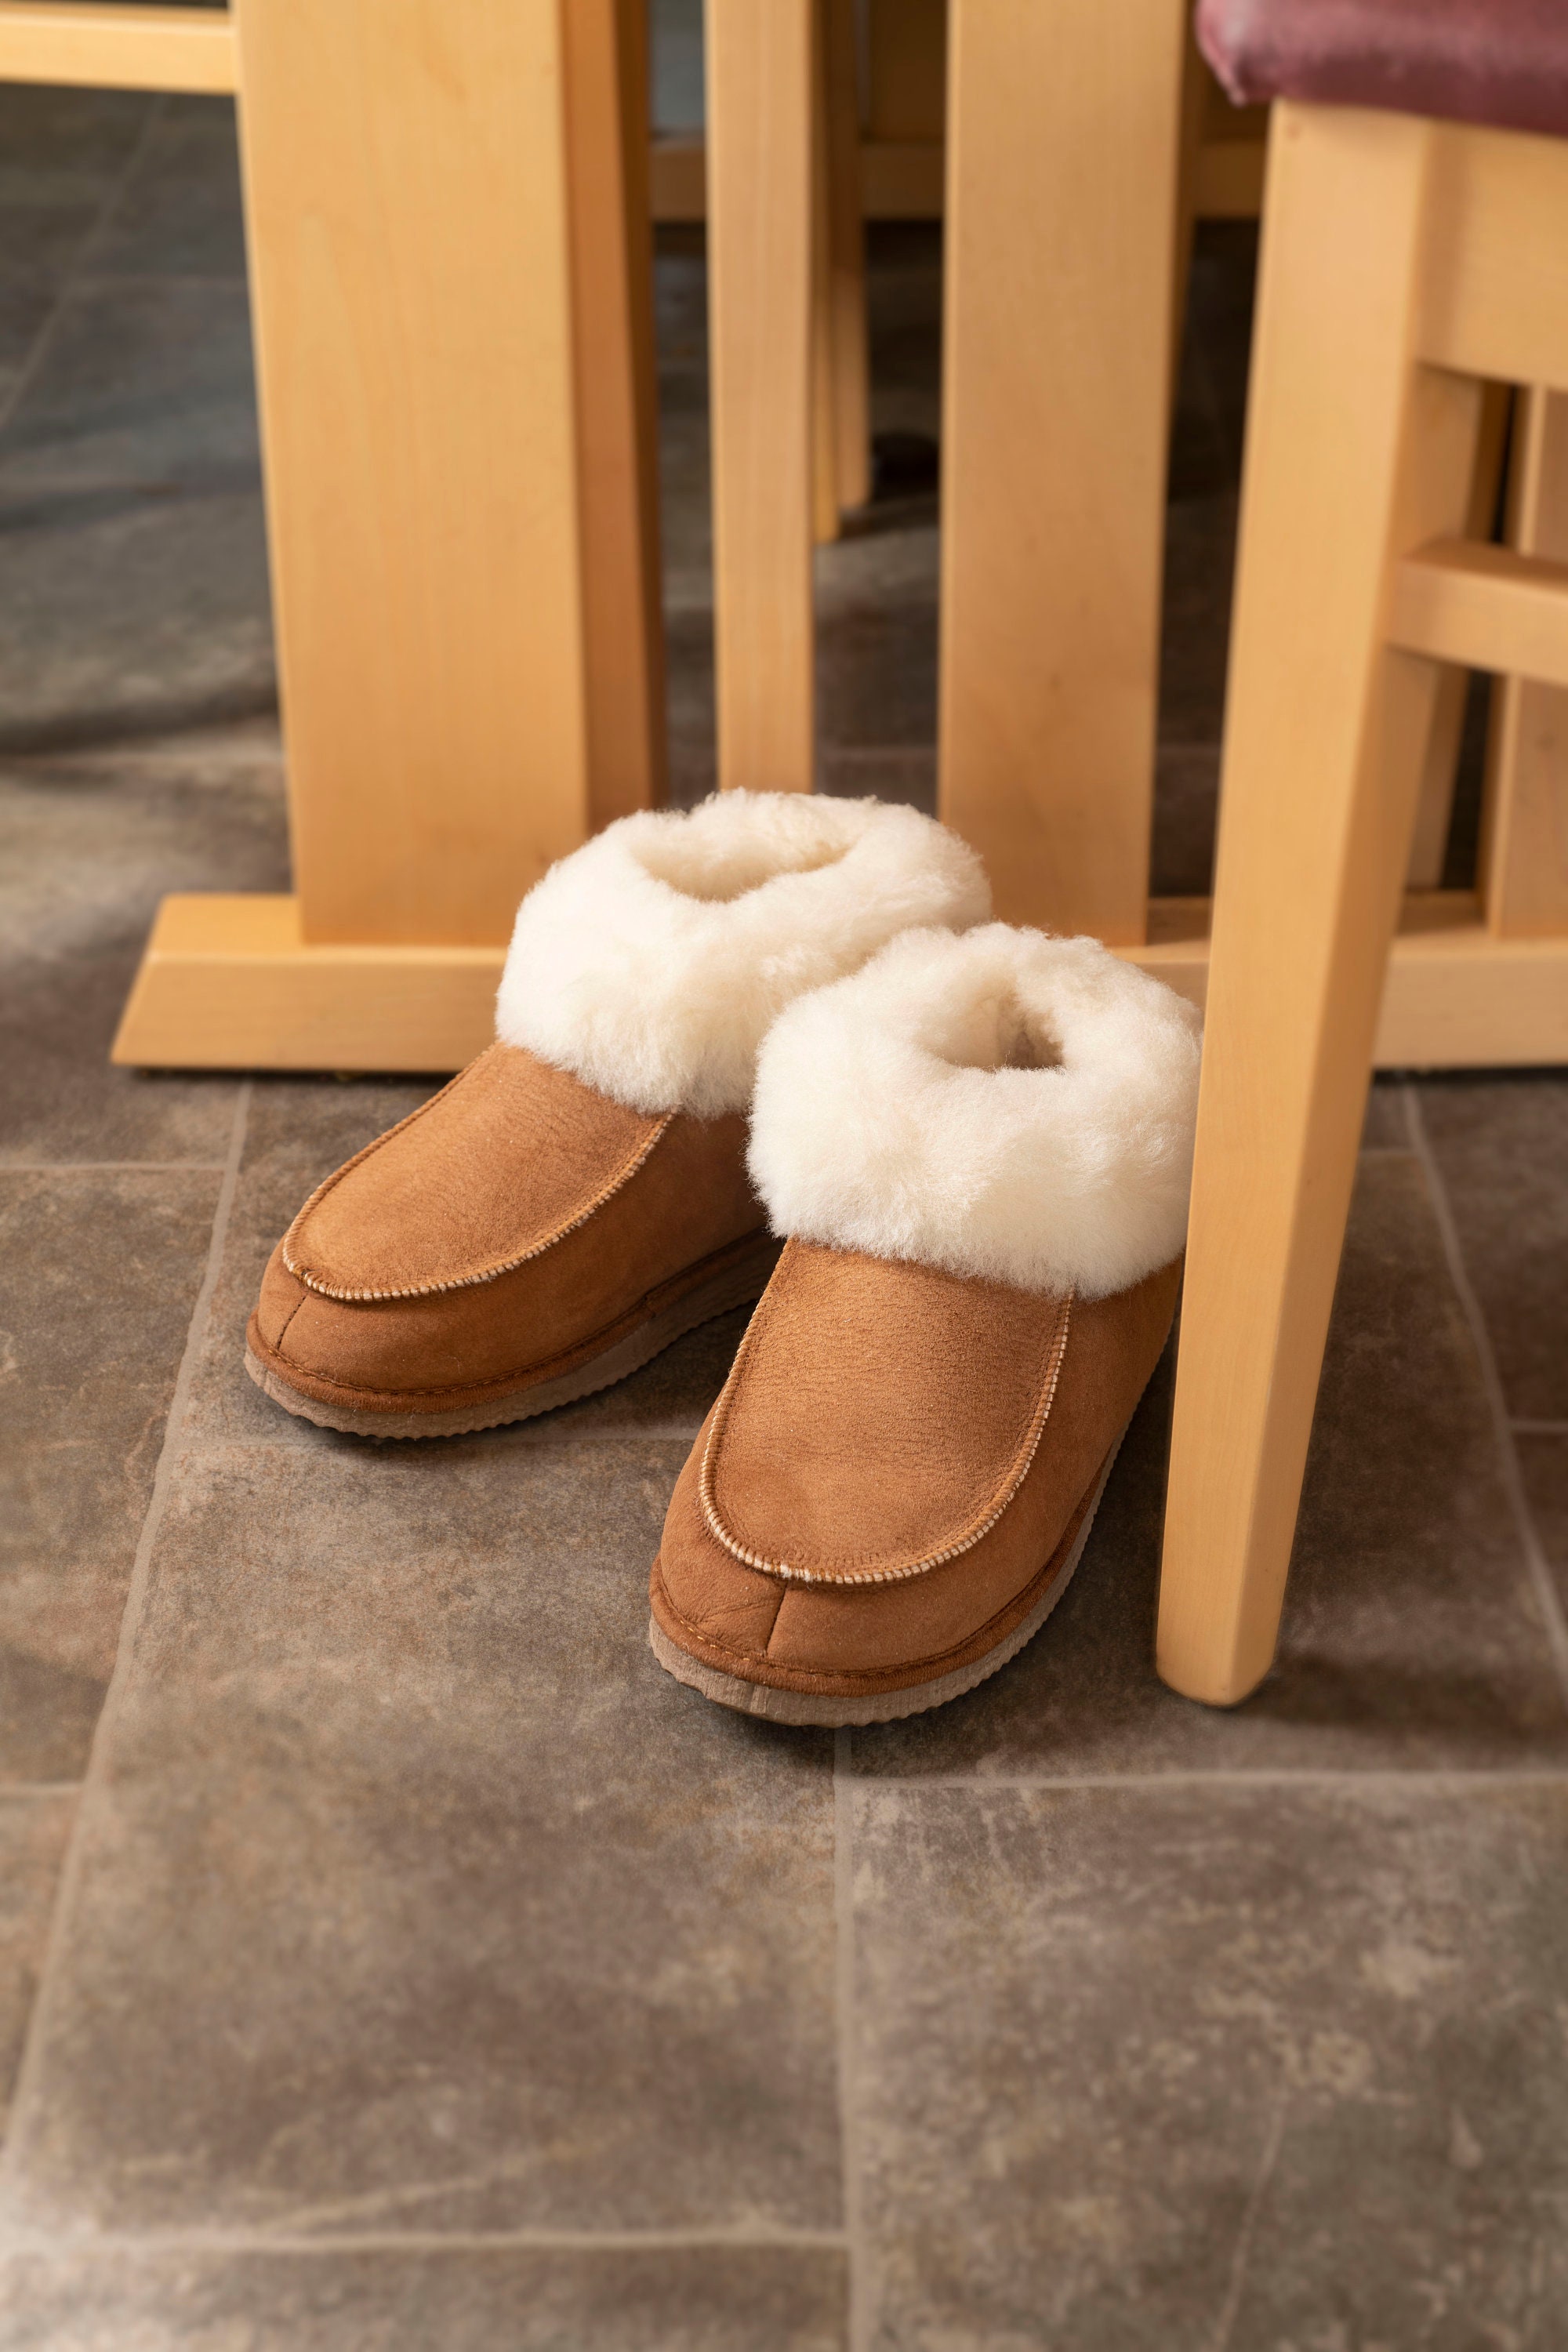 Discover more than 199 sheepskin slippers outdoor sole super hot